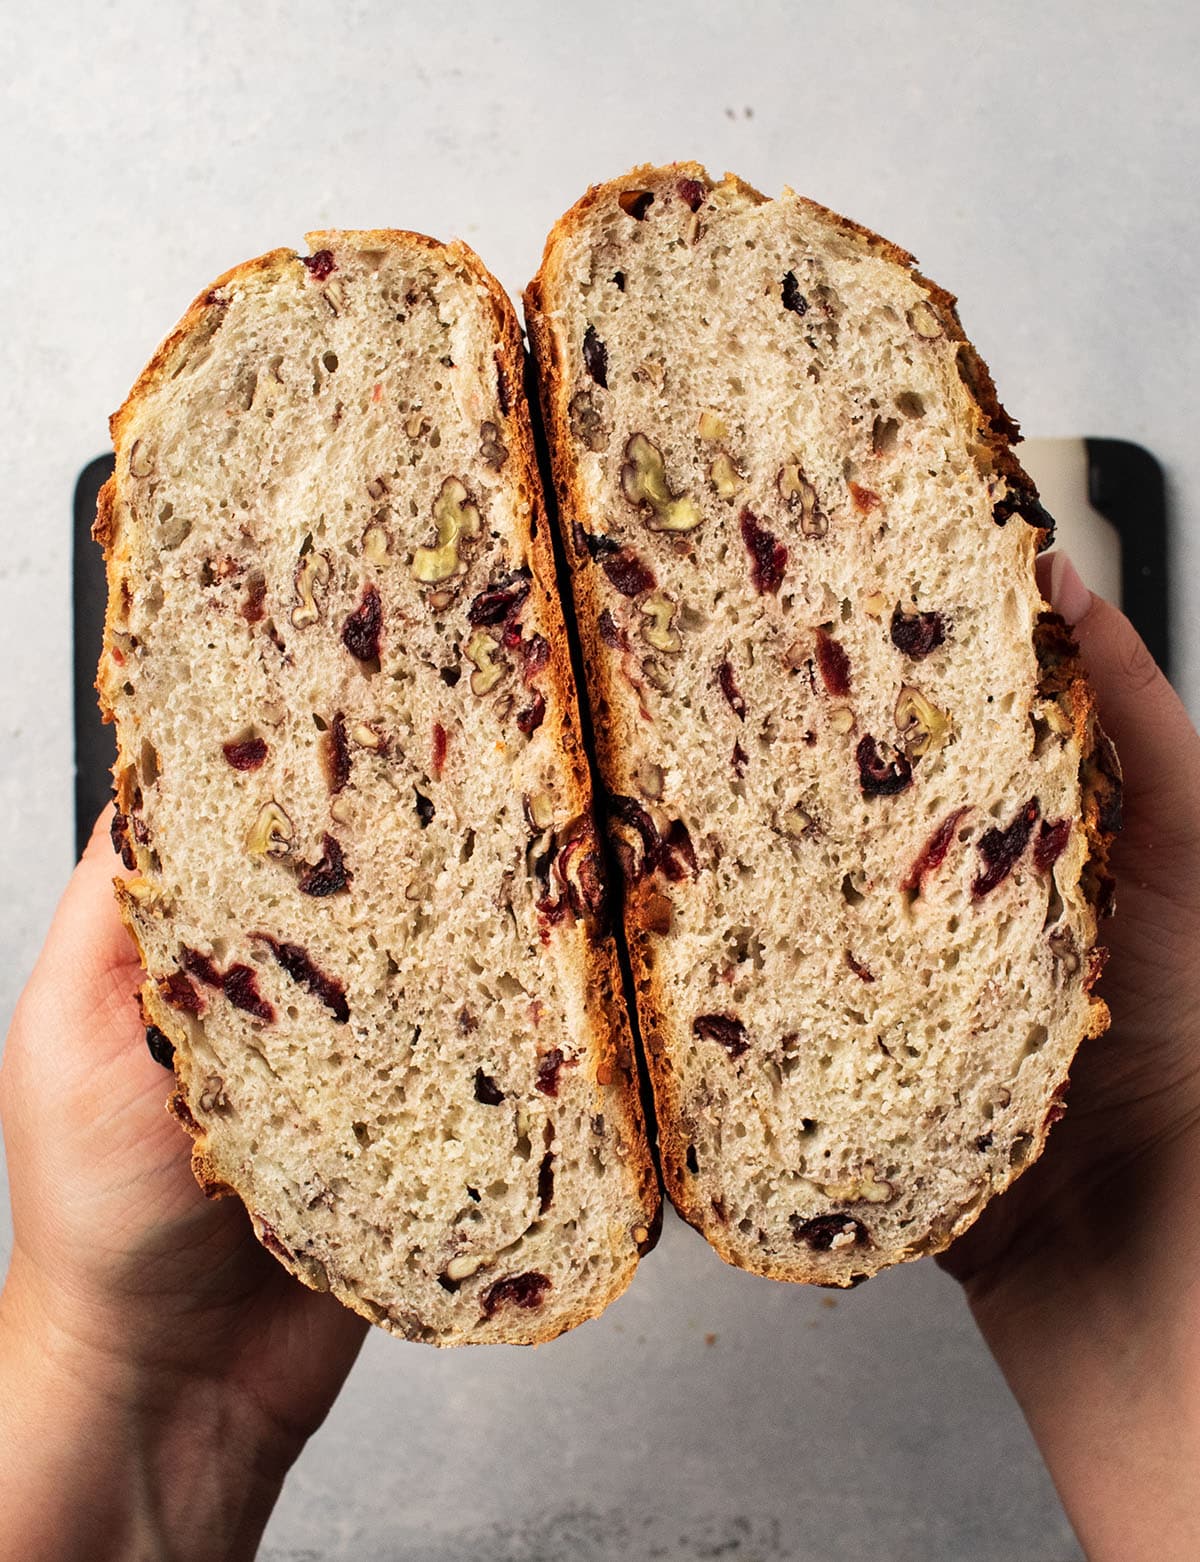 Hands holding two halves of a bread loaf together to show the crumb.